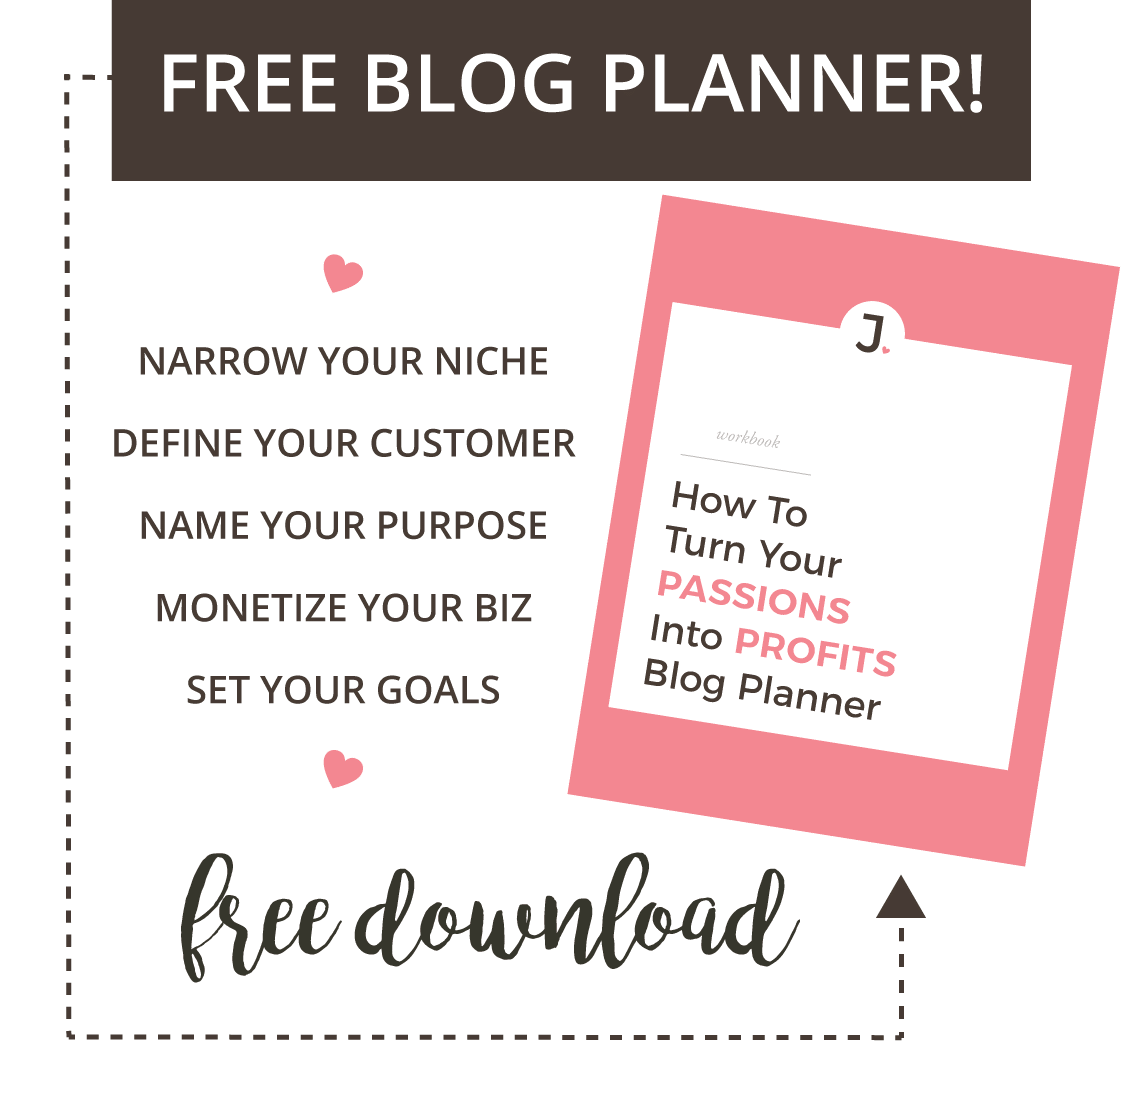 Work From Home: Start a profitable blog today! Download the FREE blog planner workbook and learn how to turn your Passions Into Profits at Jennifer-Franklin.com.